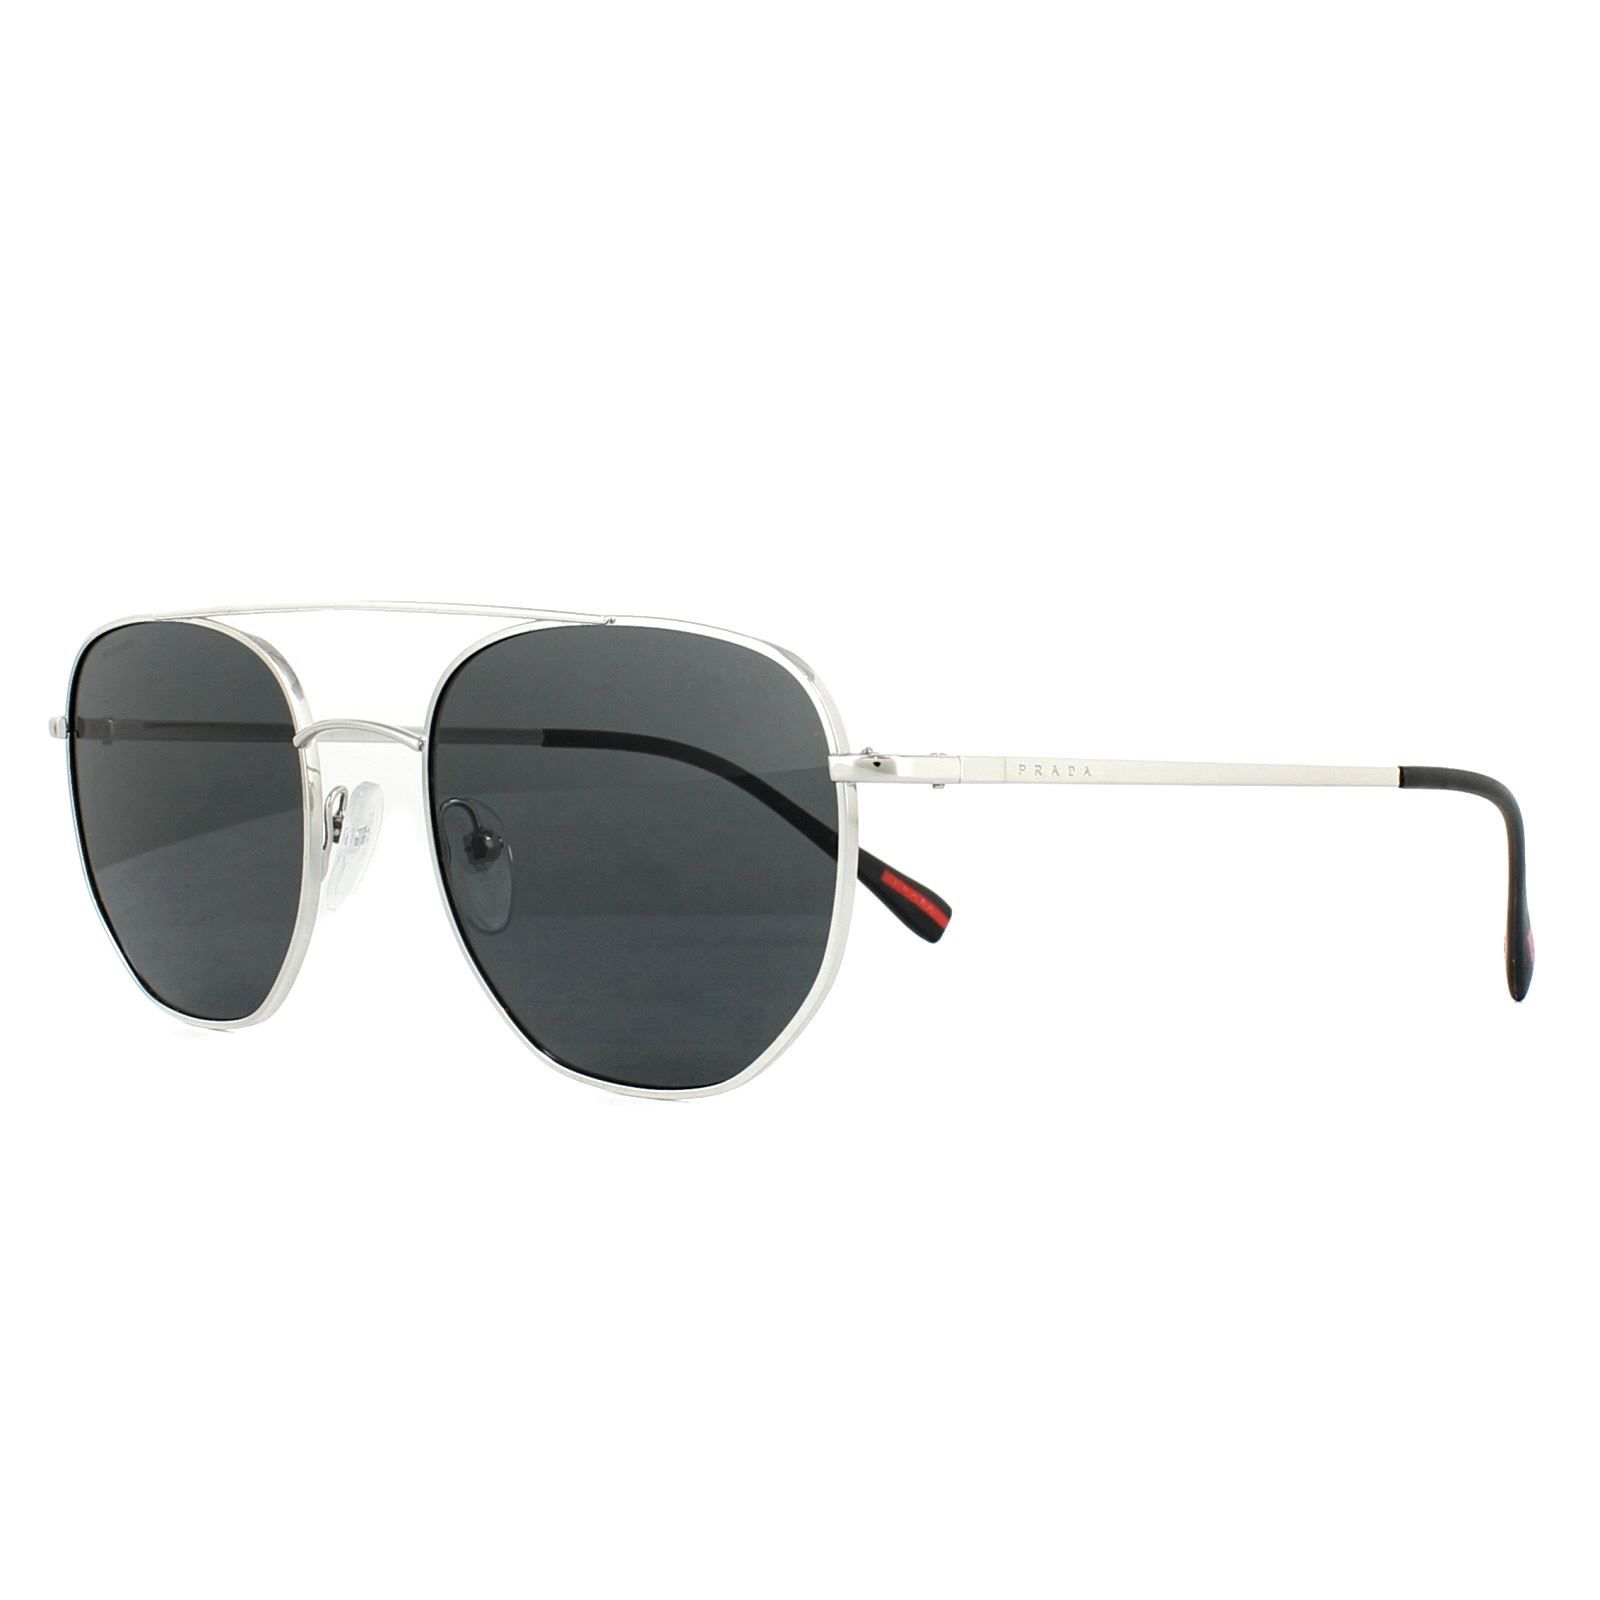 Prada Sport Sunglasses PS56SS 1BC5S0 Silver Grey are an angular frame with a round shape that has been flattened around the rims, and a prominent long top brow bar. The metal is very lightweight and rubberised nose pads further add to the comfortable feel.